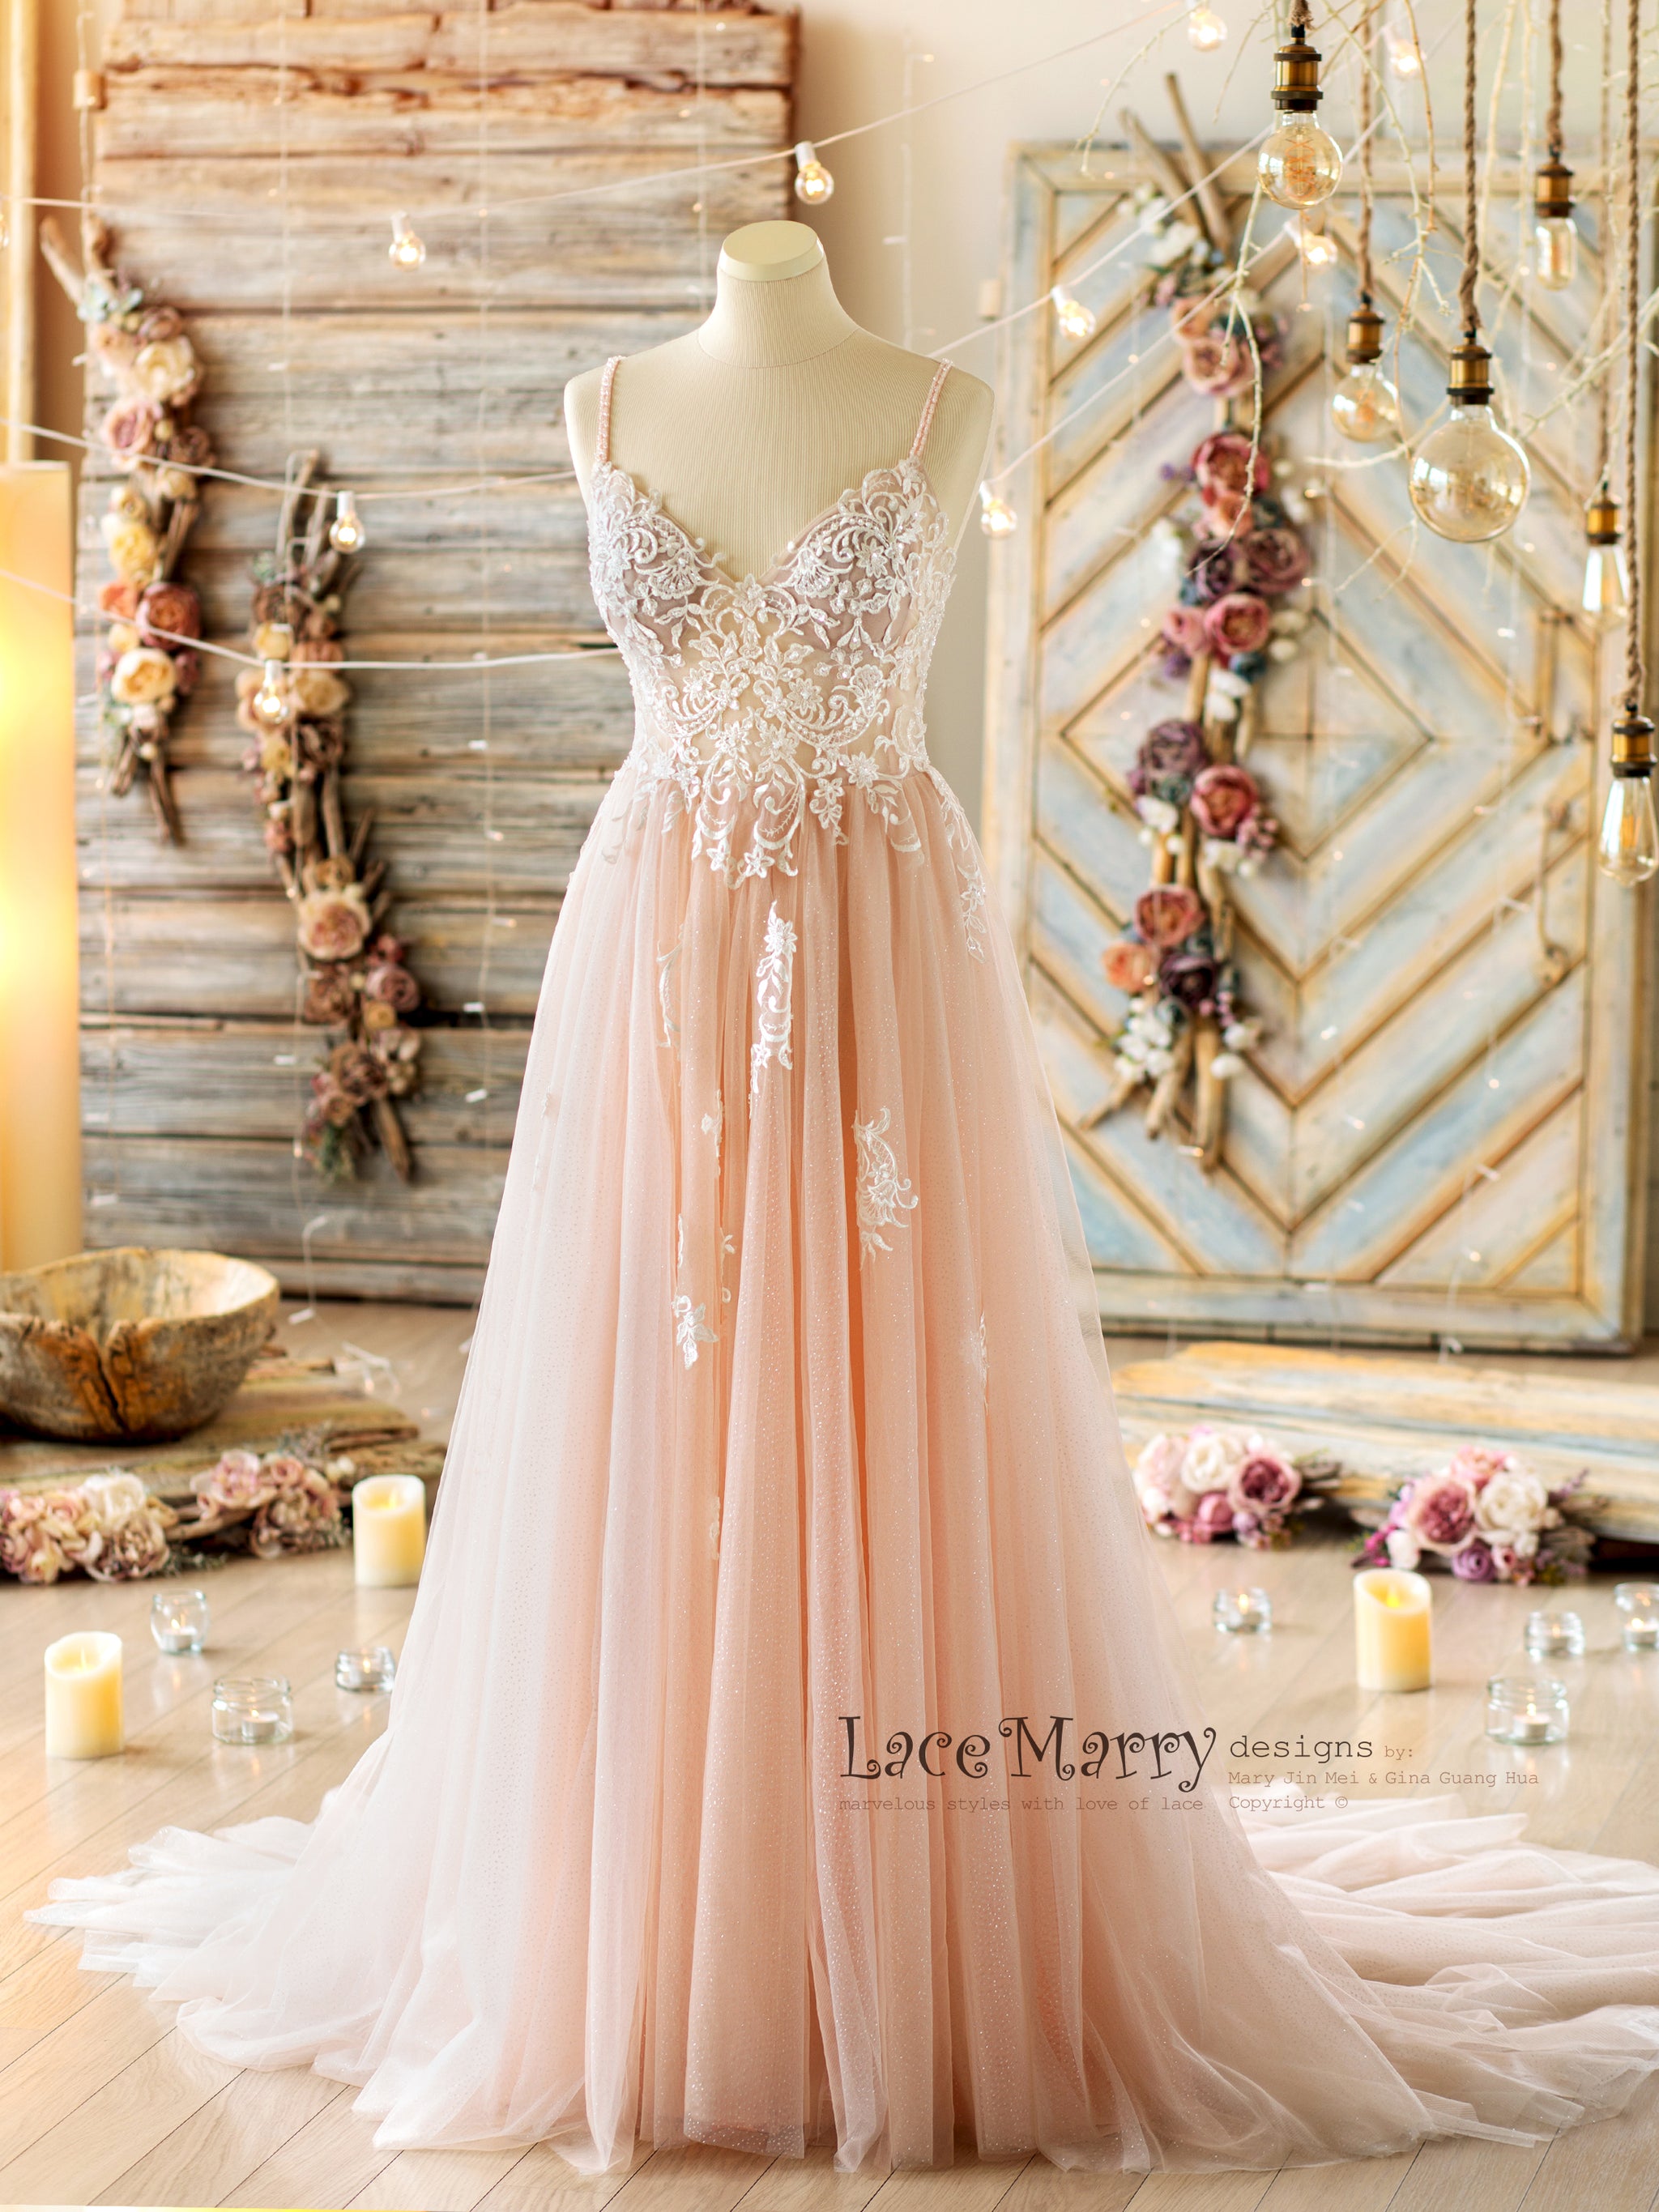 Wedding Dress Skirt Types: Shapes, Overlays, and Textures – LDS Wedding  Planner